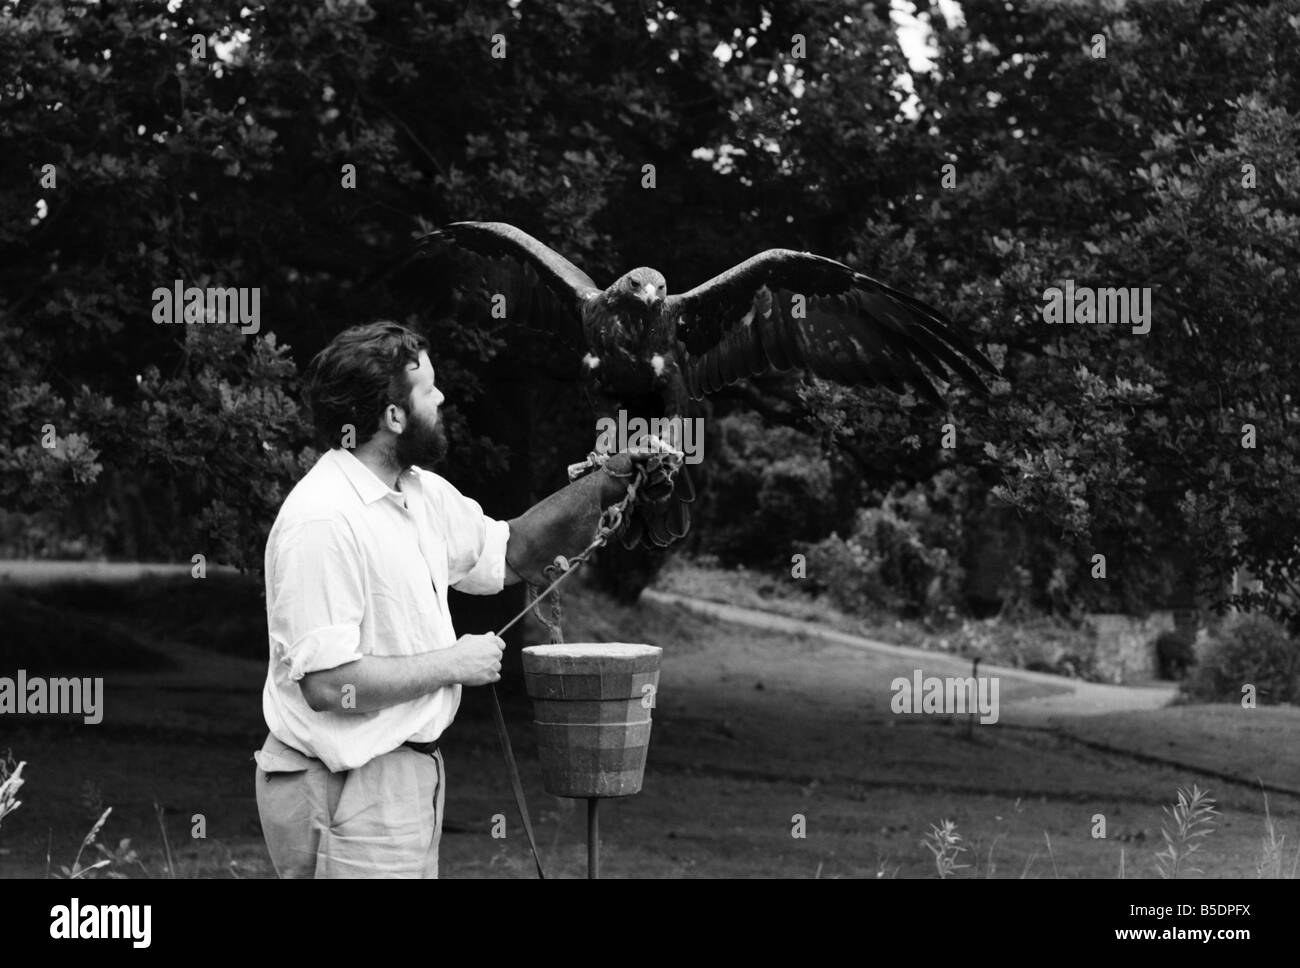 TV Zoologist Grahame Dangerfield. 1963 A978-008 Stock Photo - Alamy